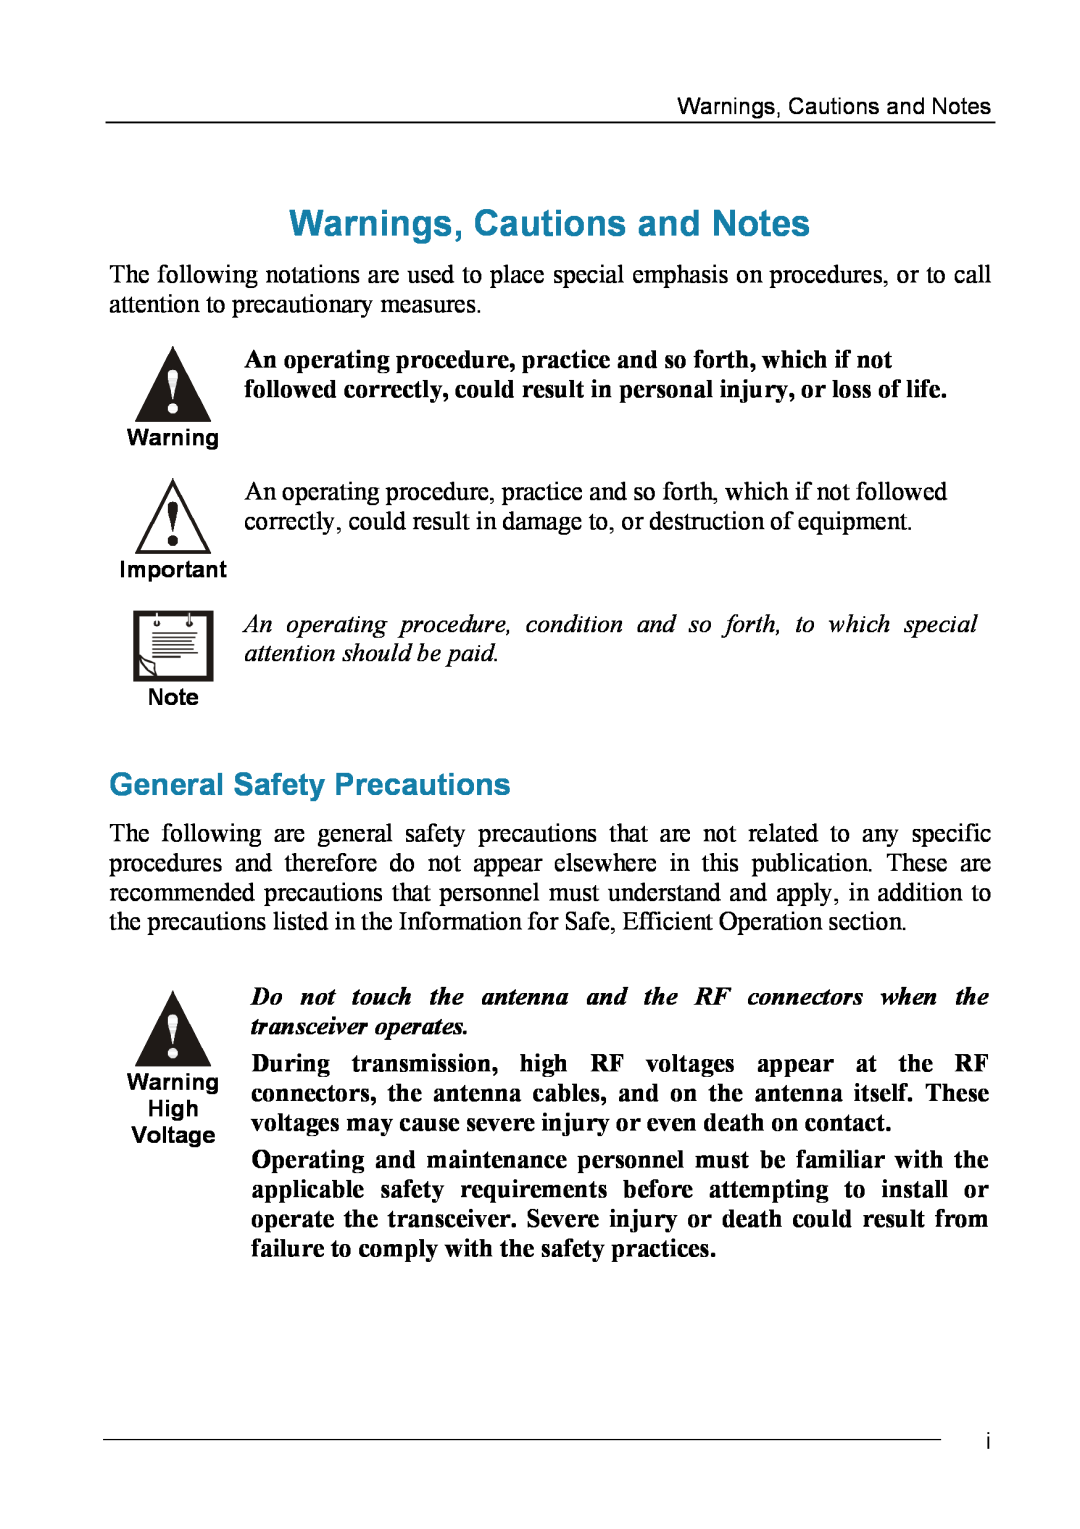 Motorola MICOM-2ES/2RS/2TS ALE manual Warnings, Cautions and Notes, General Safety Precautions 